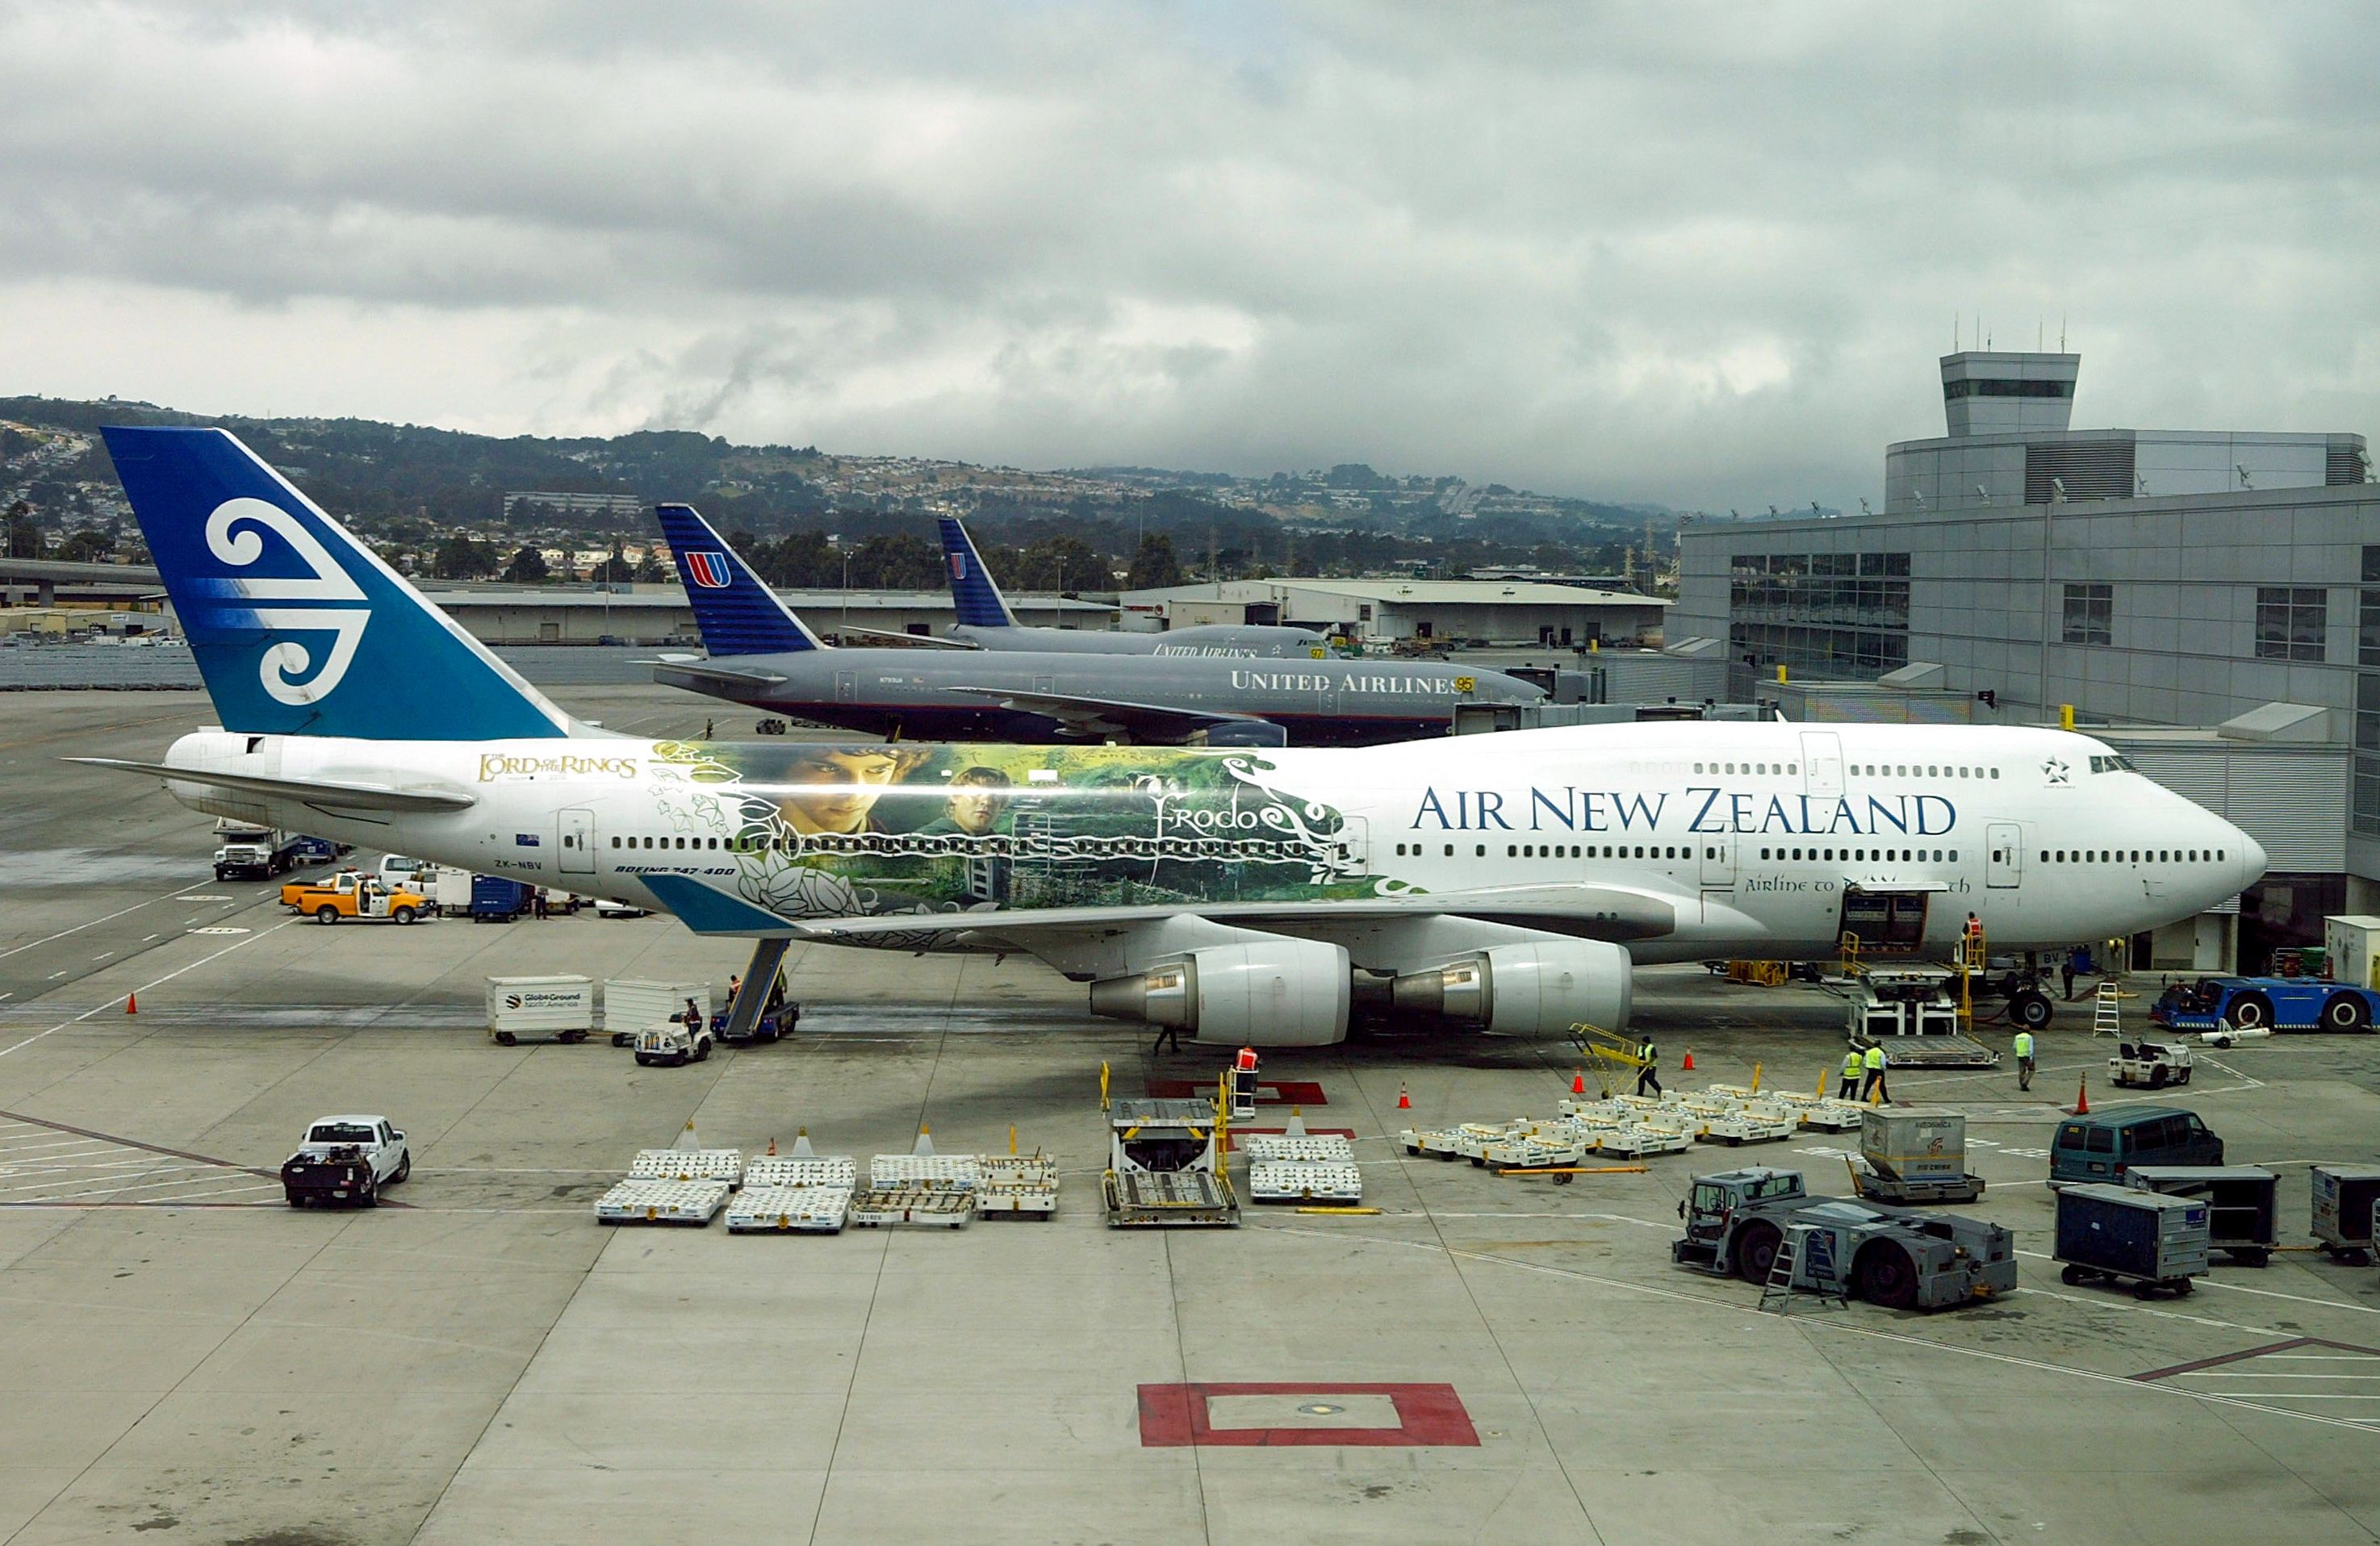 Air New Zealand Boeing 747 in SFO 30 June 2004